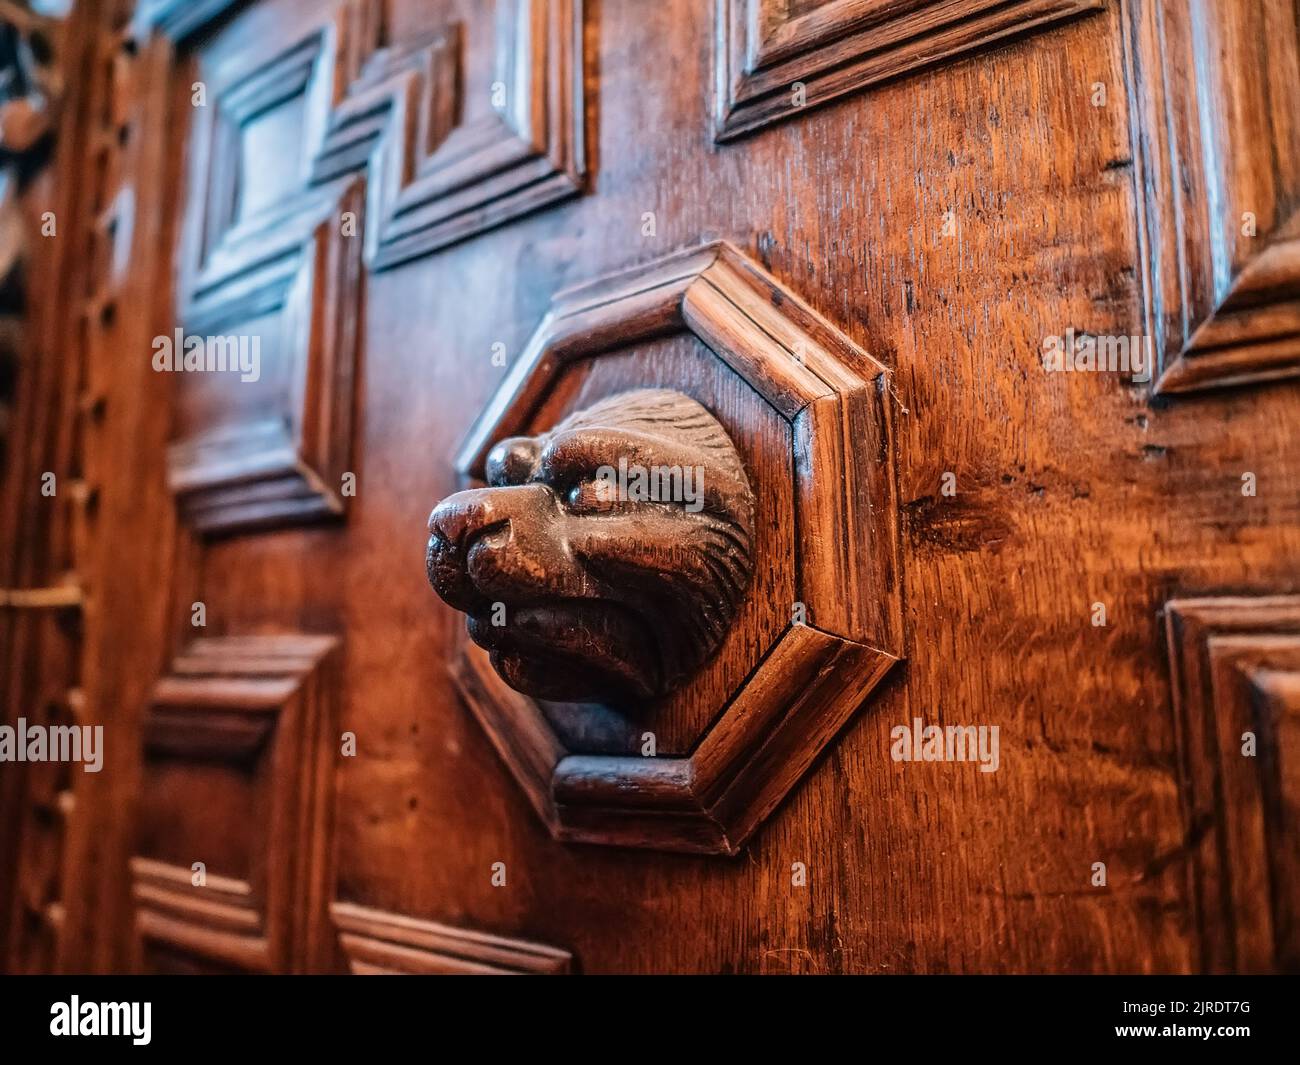 Close-up of a fragment of old antique wood furniture. Antique furniture from the 19th century. Stock Photo